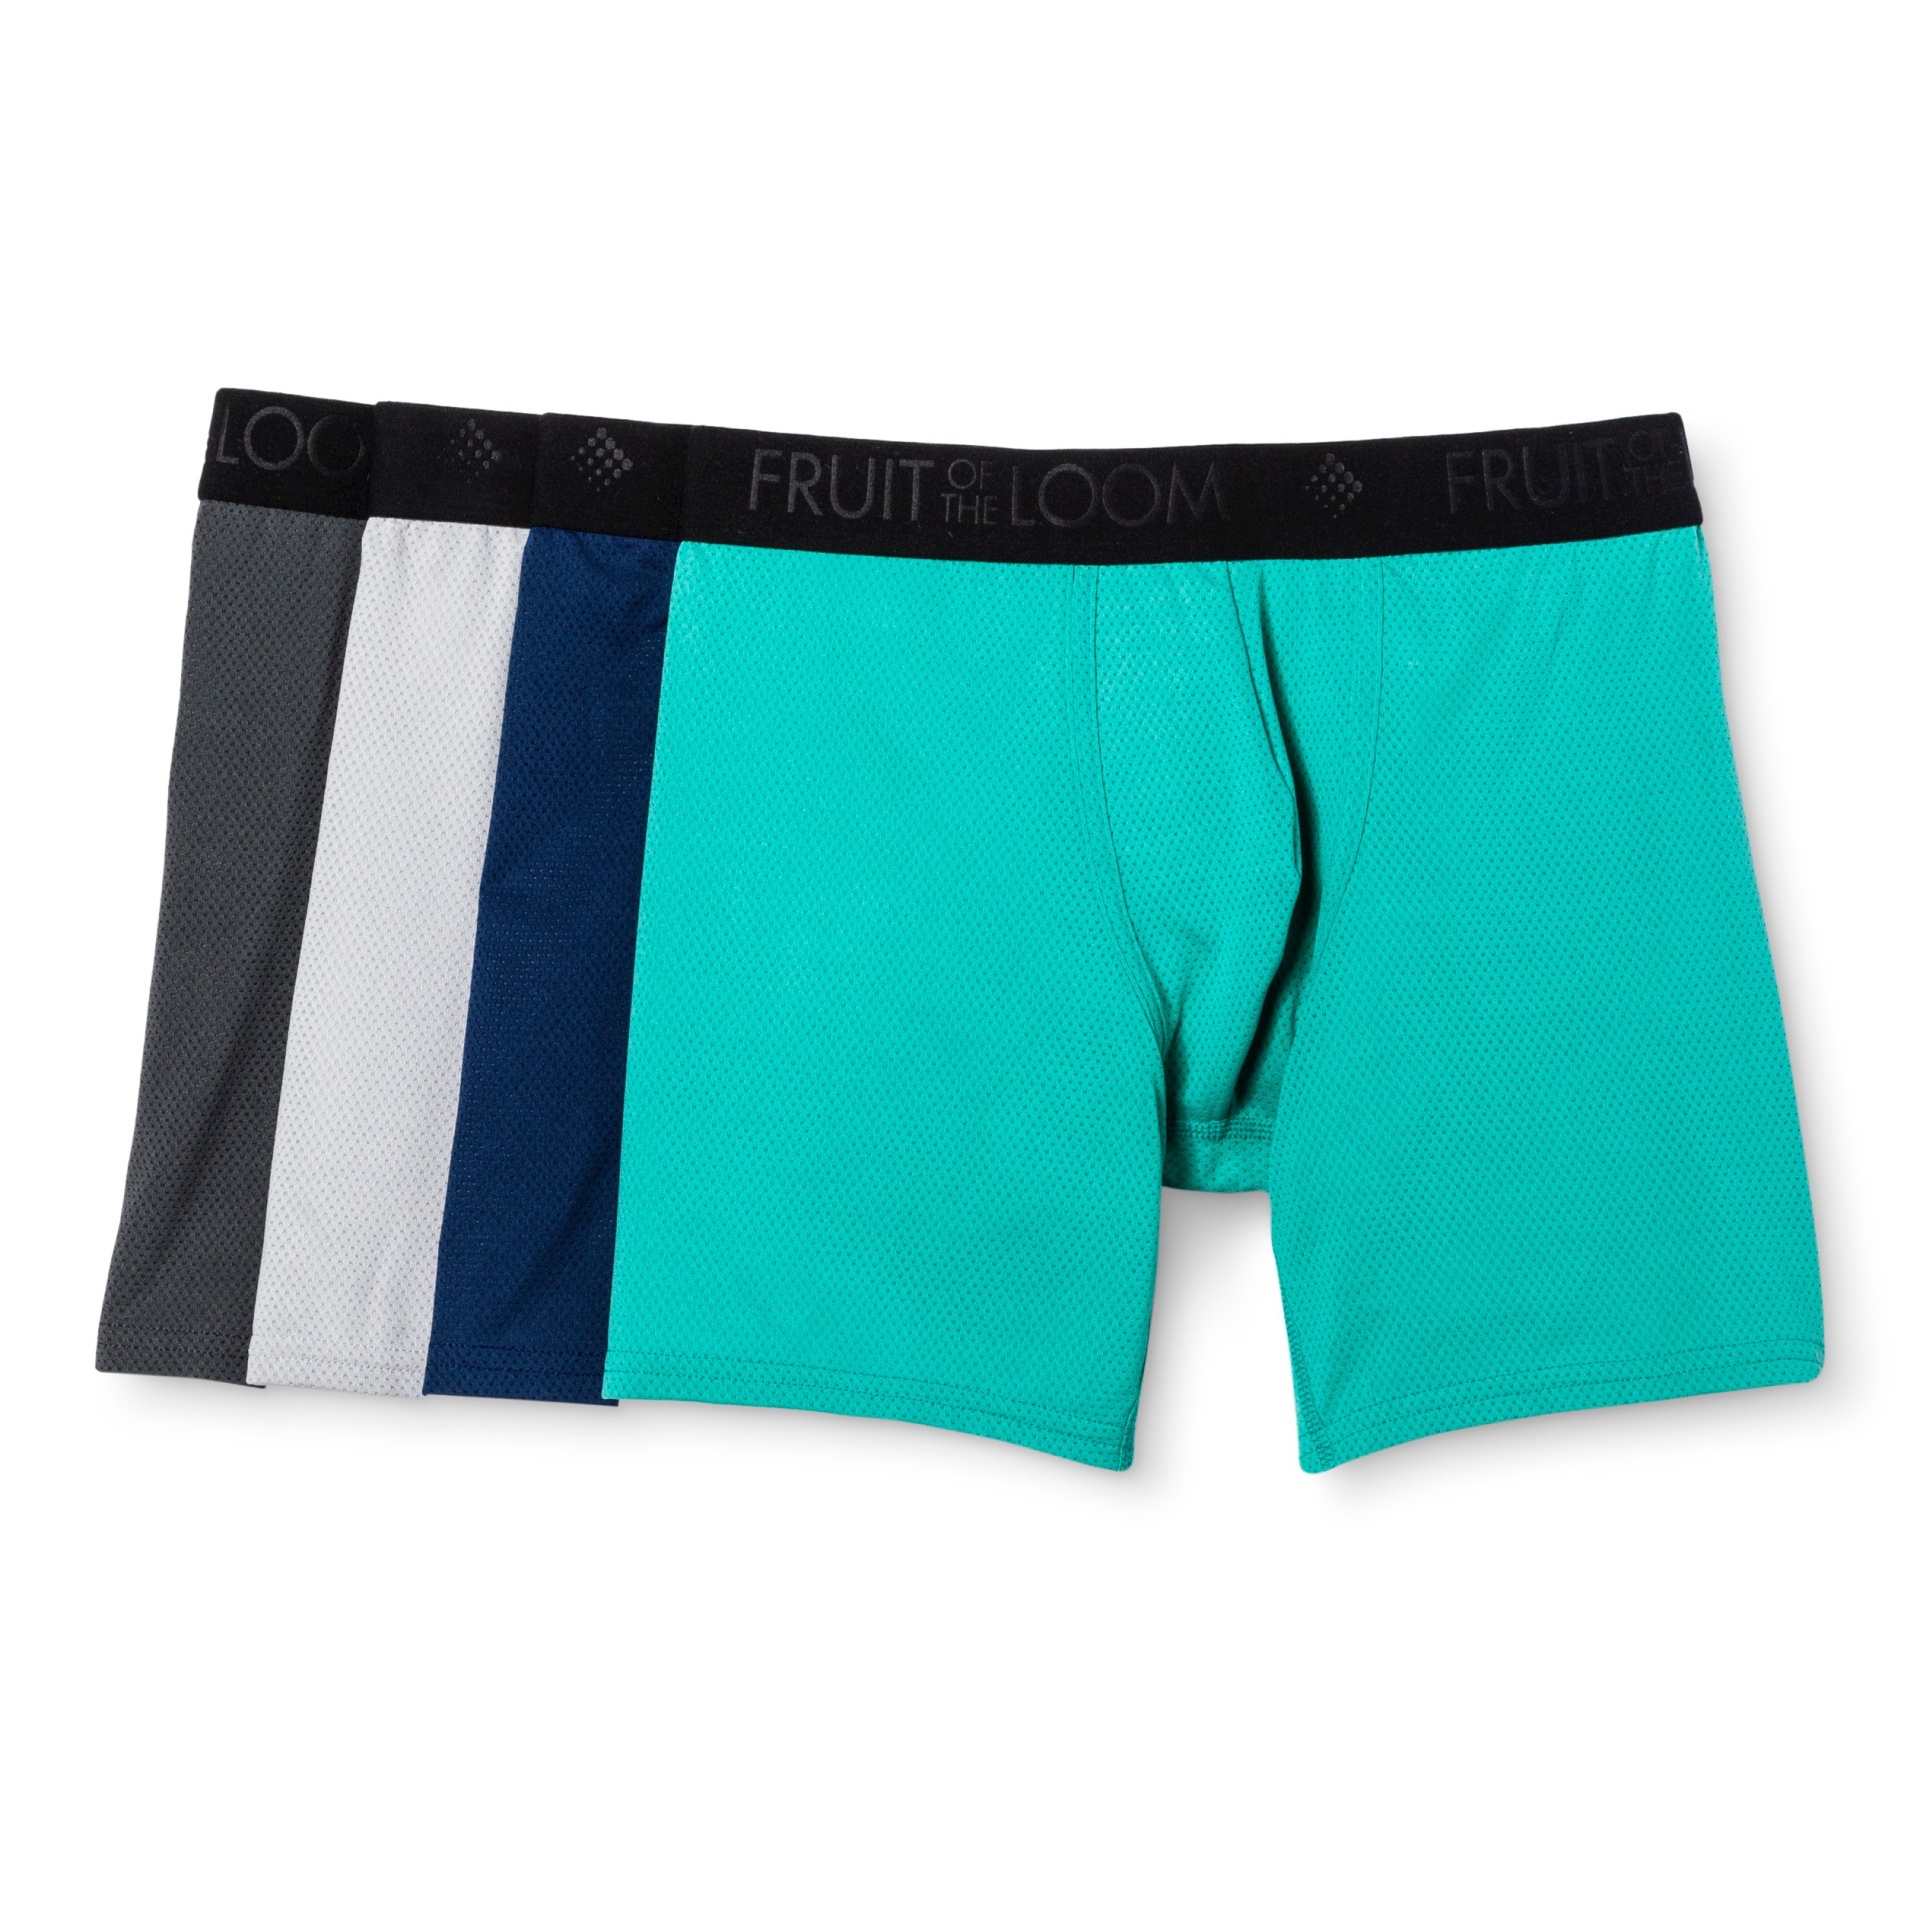 Fruit of the Loom Breathable Micro-Mesh Boxer Brief Underwear (3